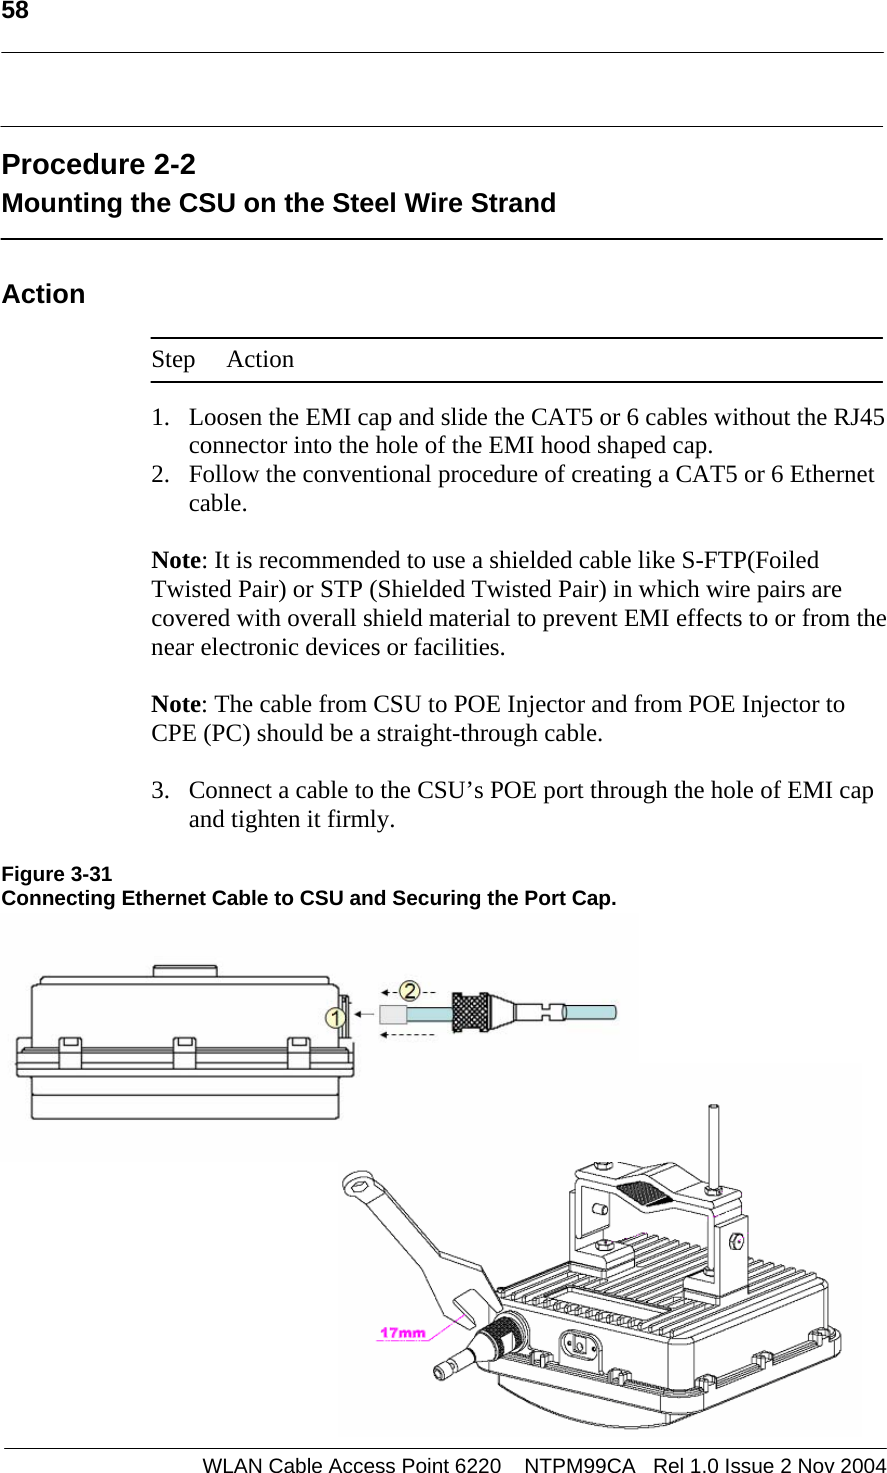   58    WLAN Cable Access Point 6220    NTPM99CA   Rel 1.0 Issue 2 Nov 2004  Procedure 2-2 Mounting the CSU on the Steel Wire Strand  Action  Step Action  1. Loosen the EMI cap and slide the CAT5 or 6 cables without the RJ45 connector into the hole of the EMI hood shaped cap. 2. Follow the conventional procedure of creating a CAT5 or 6 Ethernet cable.  Note: It is recommended to use a shielded cable like S-FTP(Foiled Twisted Pair) or STP (Shielded Twisted Pair) in which wire pairs are covered with overall shield material to prevent EMI effects to or from the near electronic devices or facilities.    Note: The cable from CSU to POE Injector and from POE Injector to CPE (PC) should be a straight-through cable.   3. Connect a cable to the CSU’s POE port through the hole of EMI cap and tighten it firmly.  Figure 3-31 Connecting Ethernet Cable to CSU and Securing the Port Cap.            